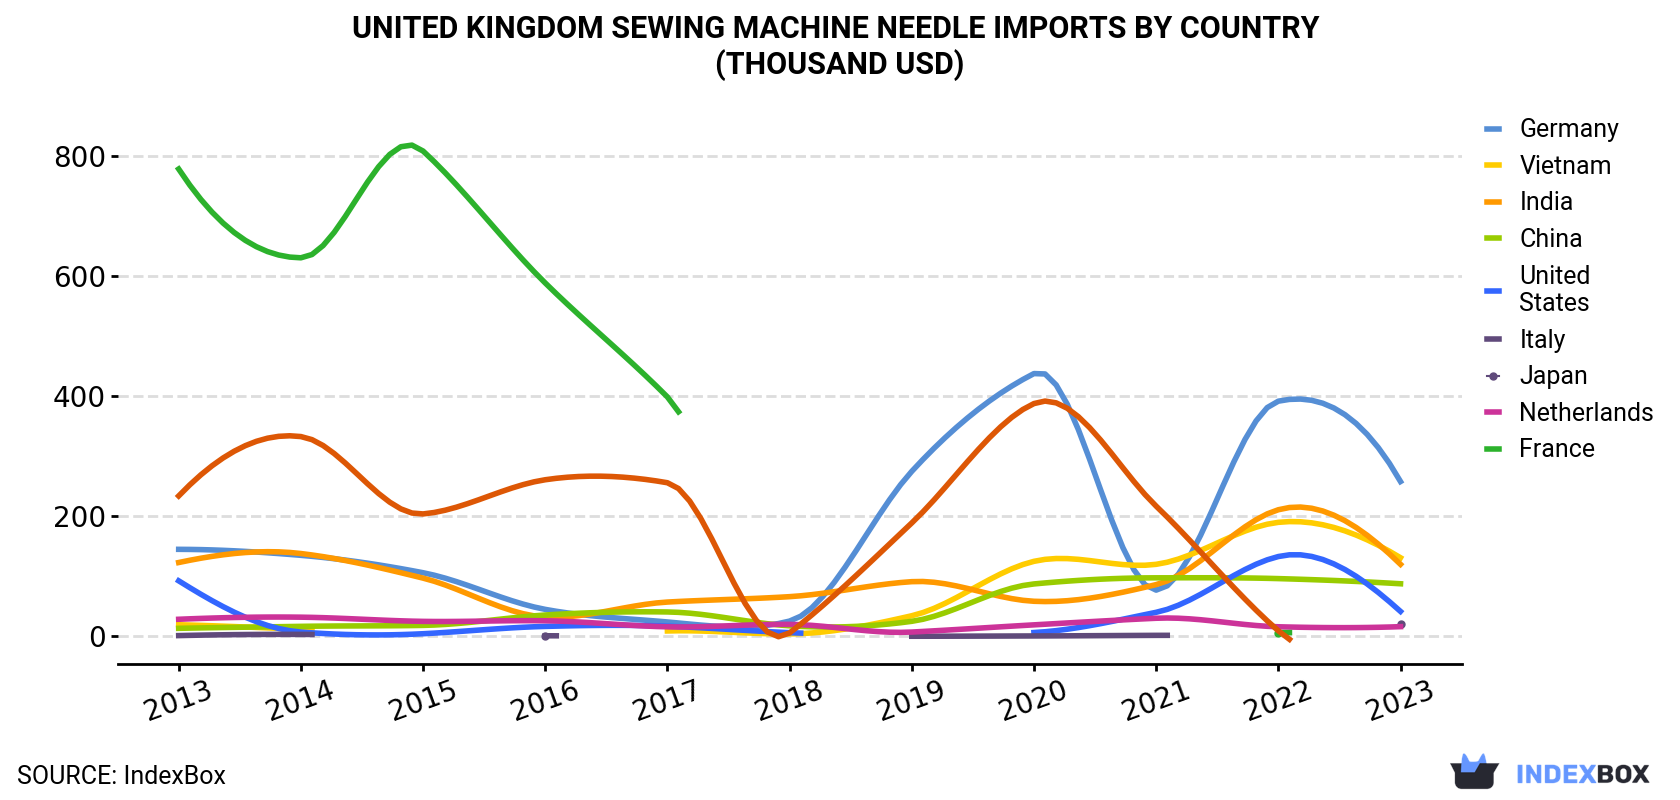 United Kingdom Sewing Machine Needle Imports By Country (Thousand USD)